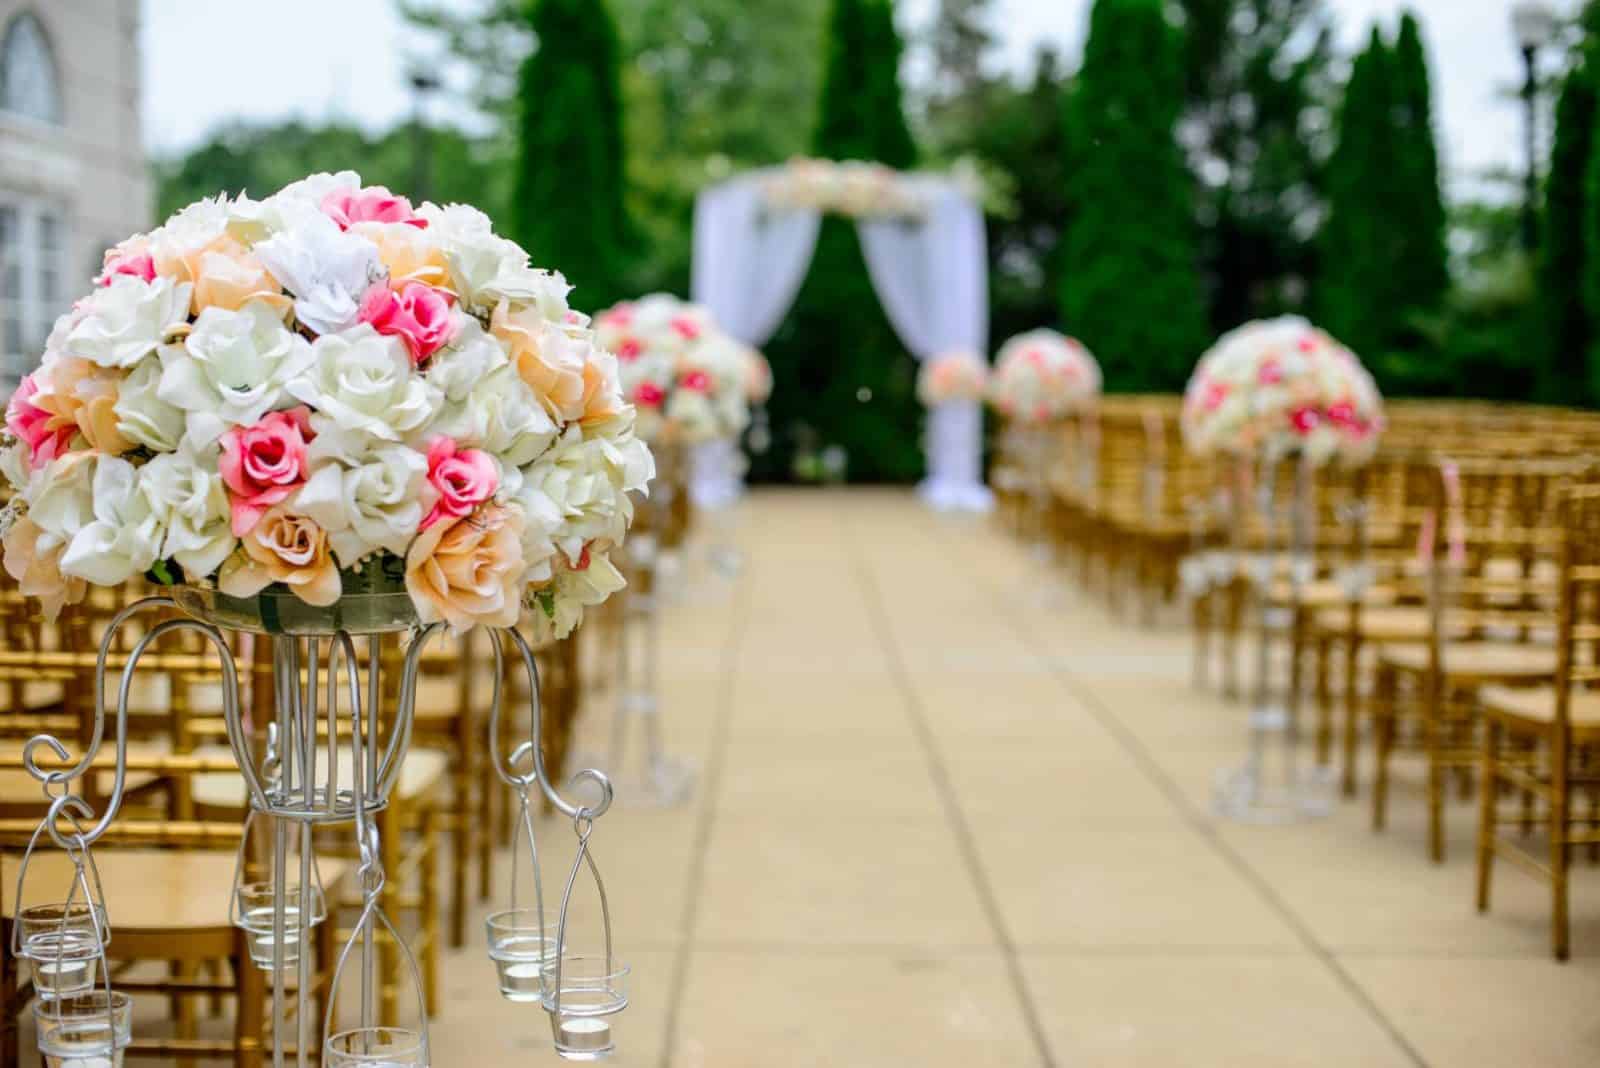 How to choose a perfect wedding venue